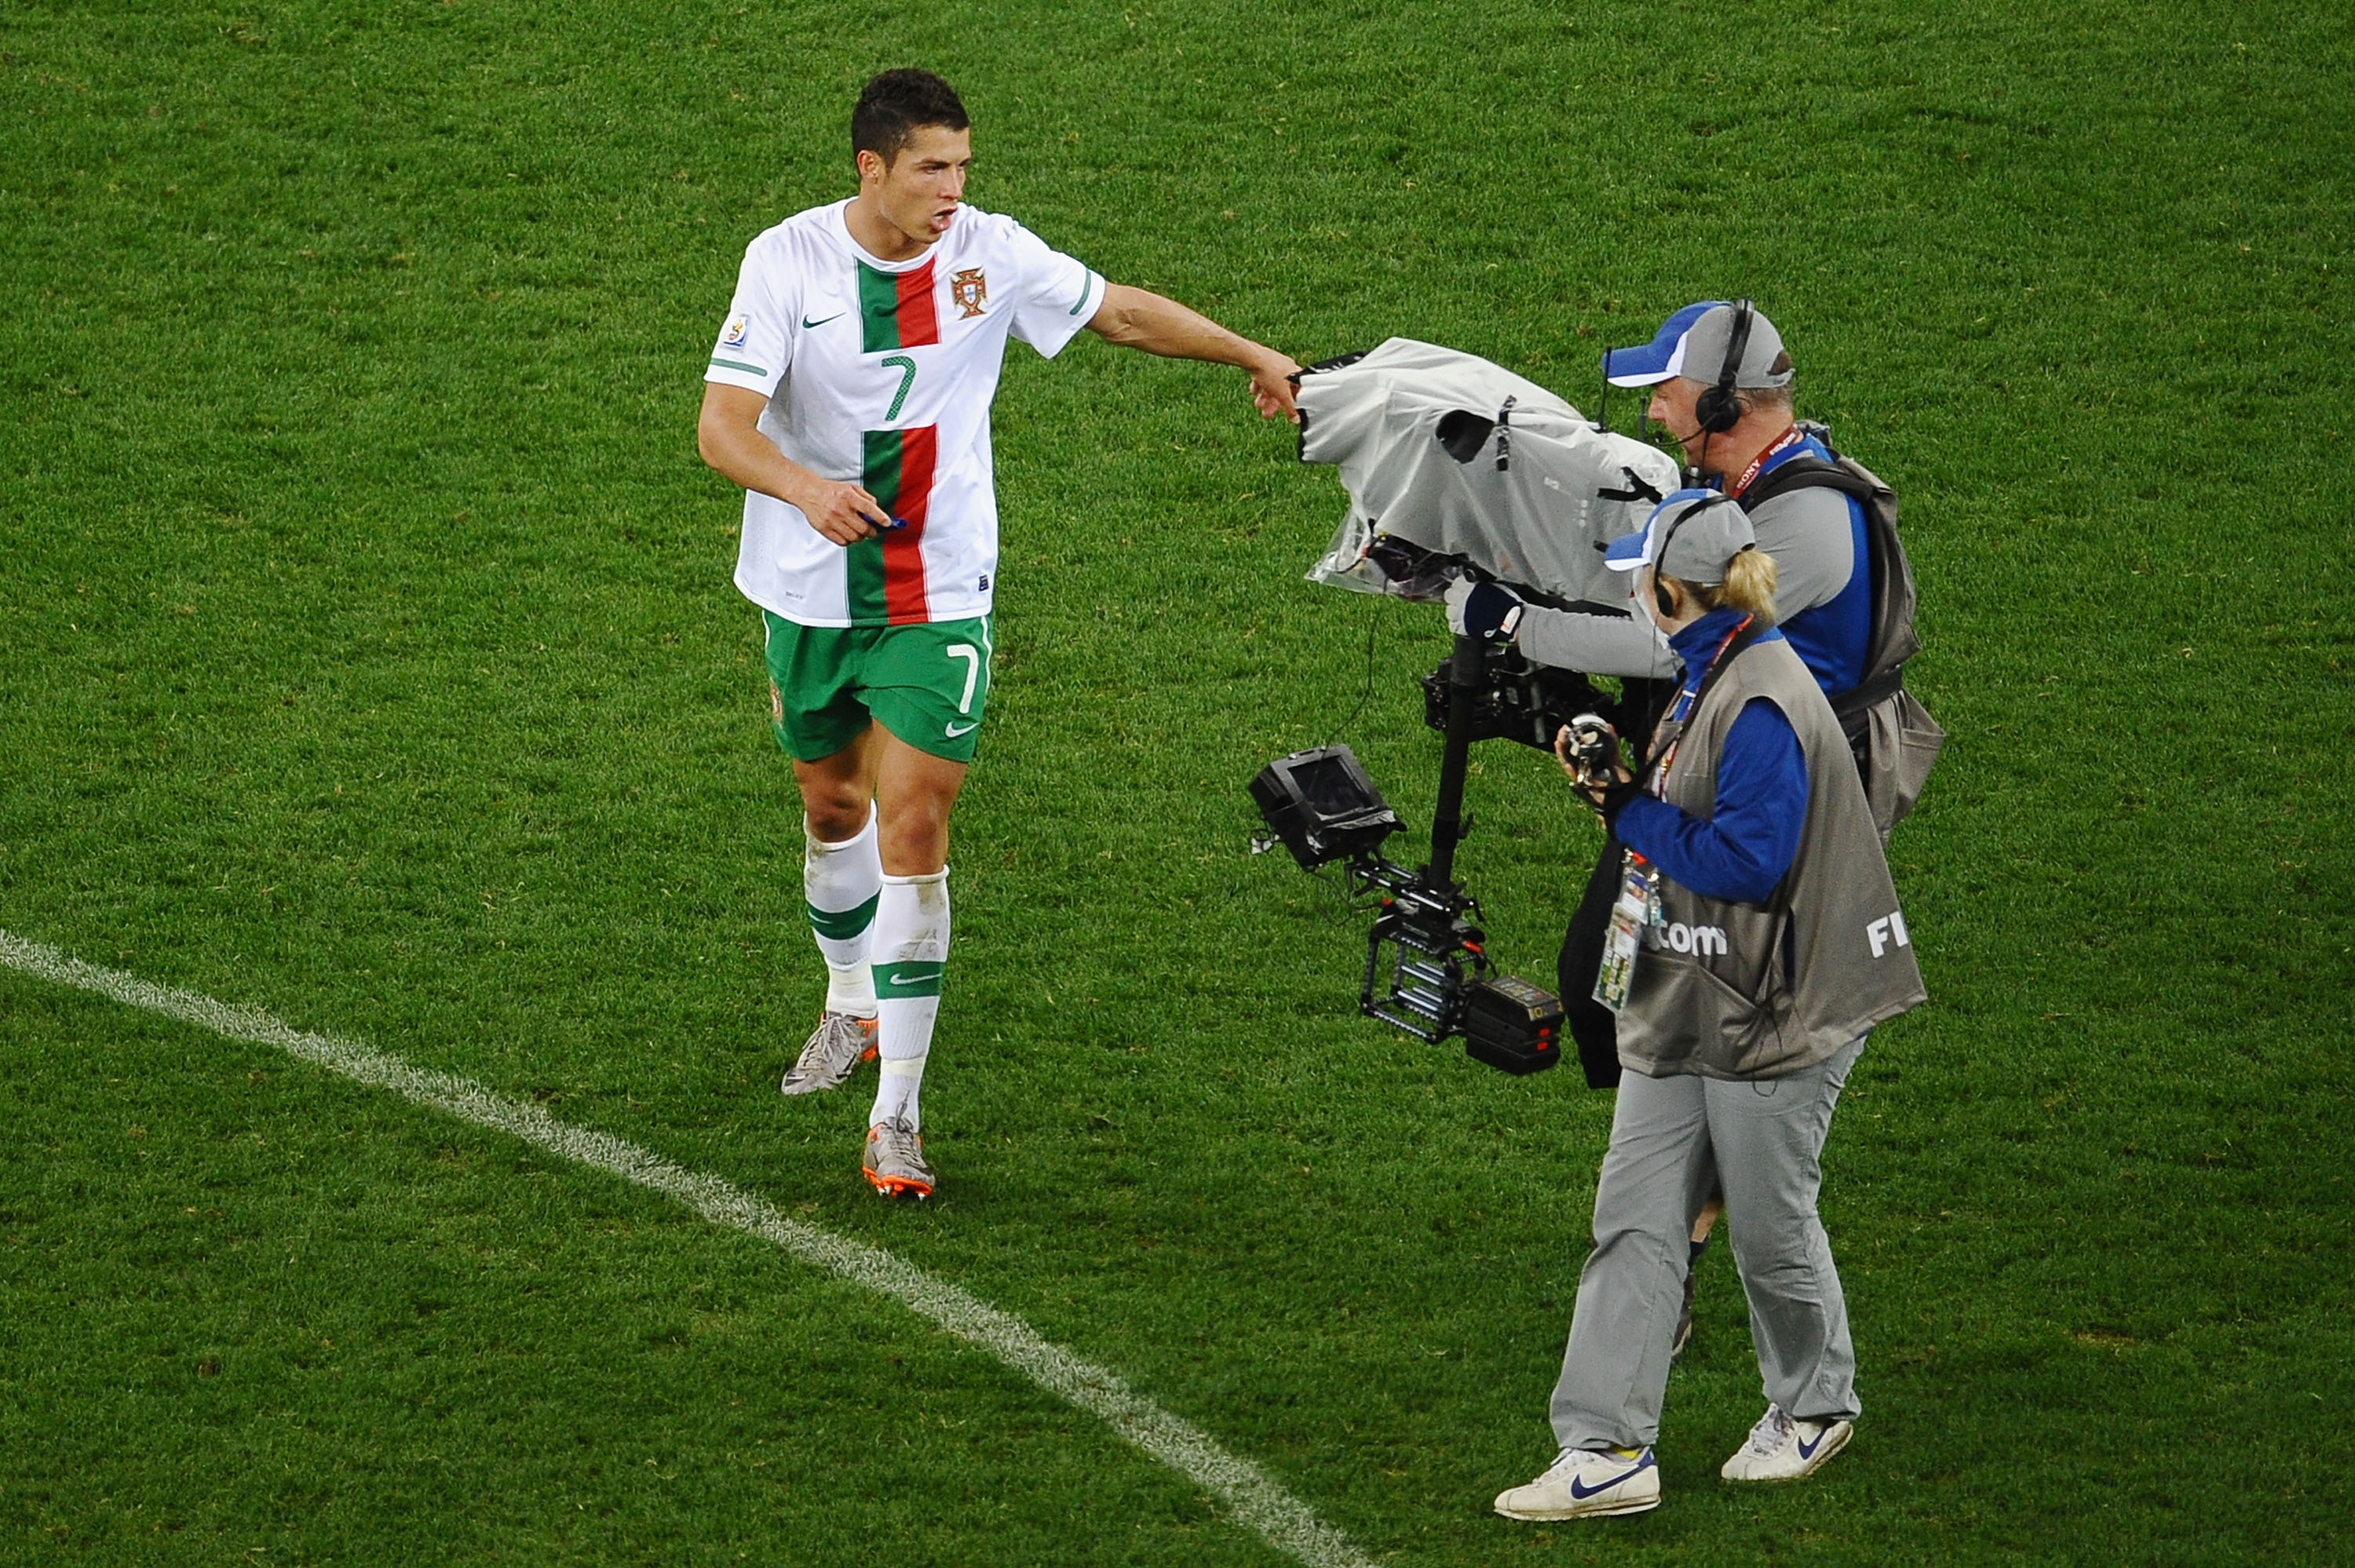 CAPE TOWN, SOUTH AFRICA - JUNE 29:  A dejected Cristiano Ronaldo of Portugal reacts to a TV camera after suffering defeat in the 2010 FIFA World Cup South Africa Round of Sixteen match between Spain and Portugal at Green Point Stadium on June 29, 2010 in